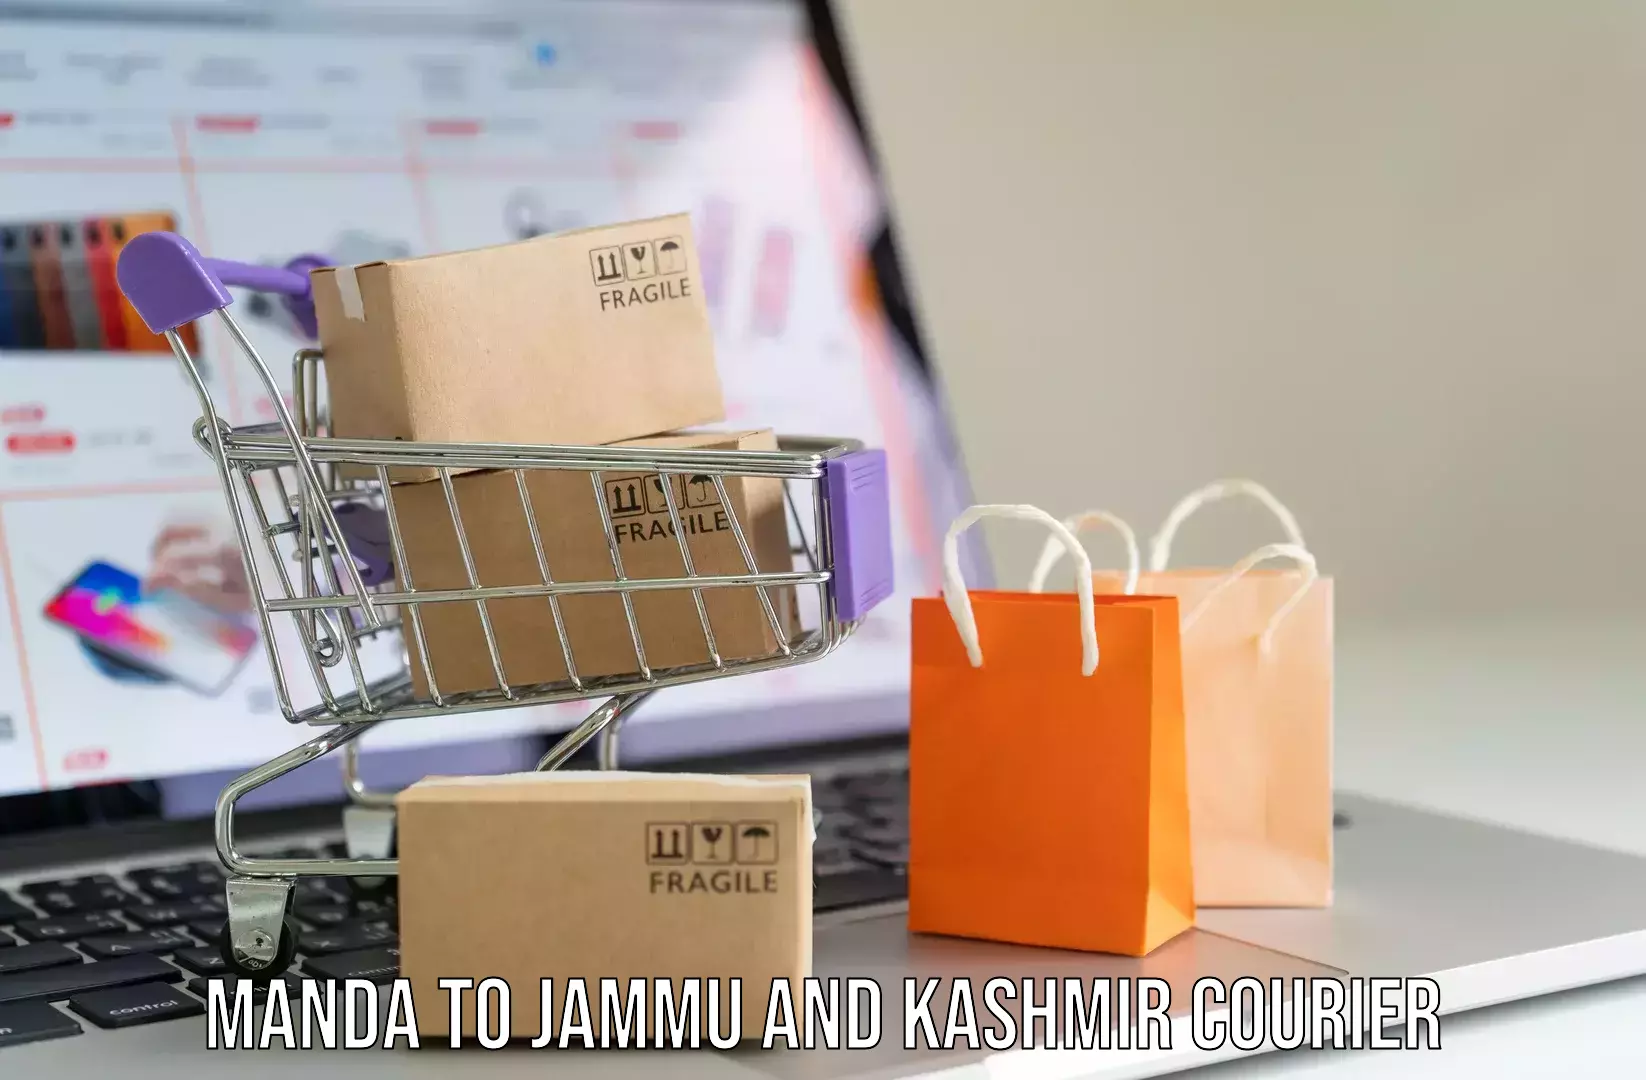 Online luggage shipping booking in Manda to Jammu and Kashmir